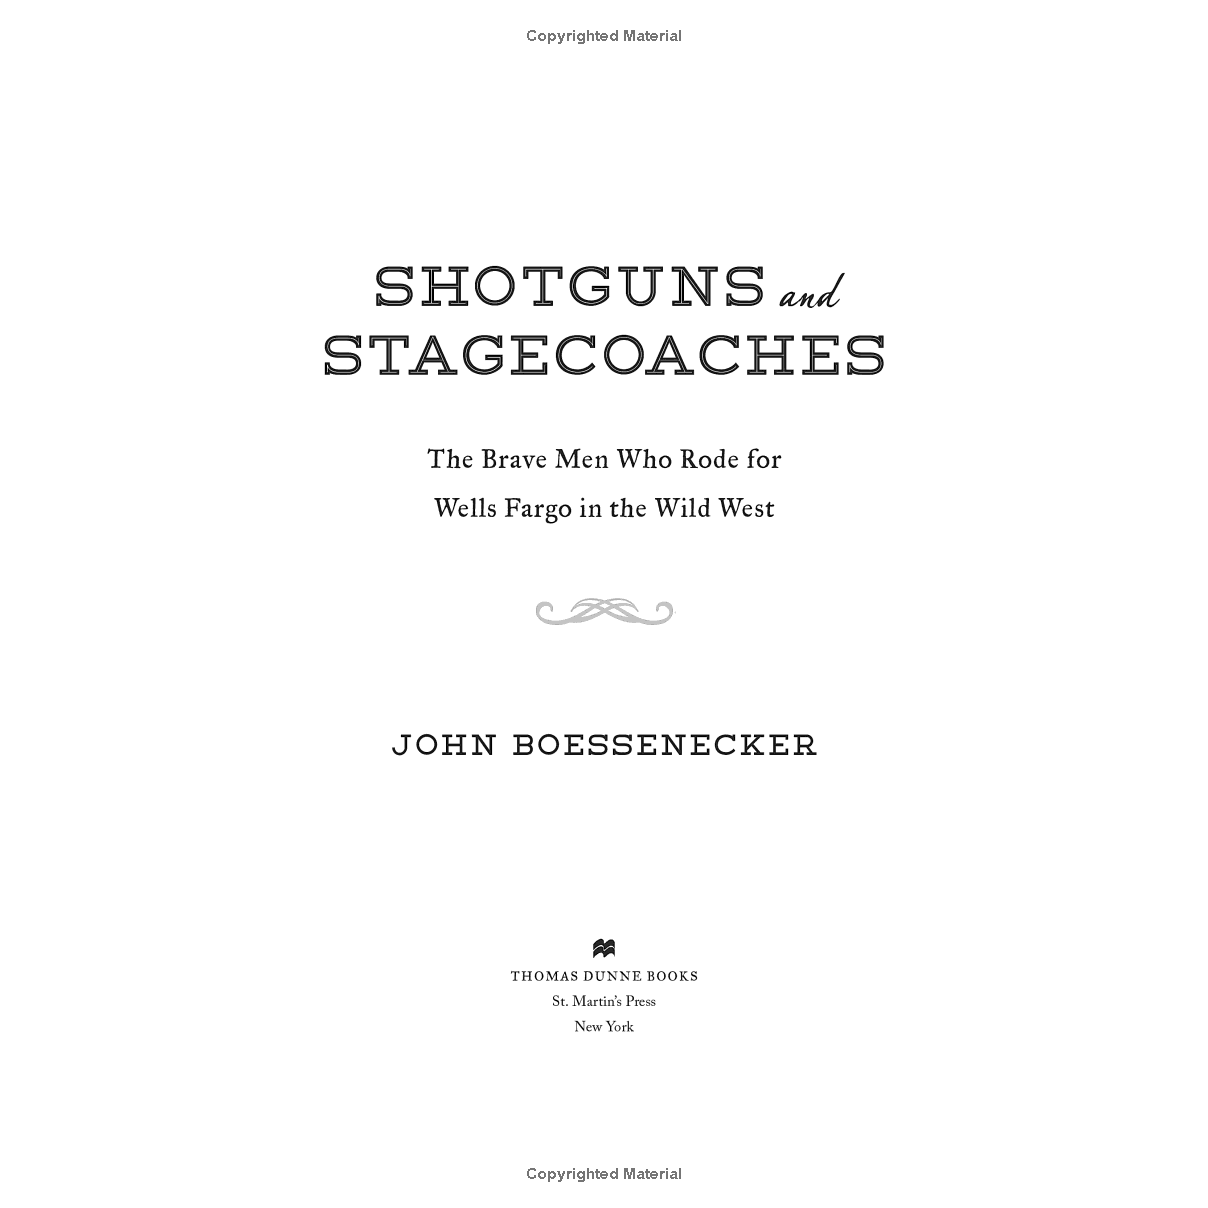 Shotguns and Stagecoaches: The Brave Men Who Rode for Wells Fargo in the Wild West by John Boessenecker